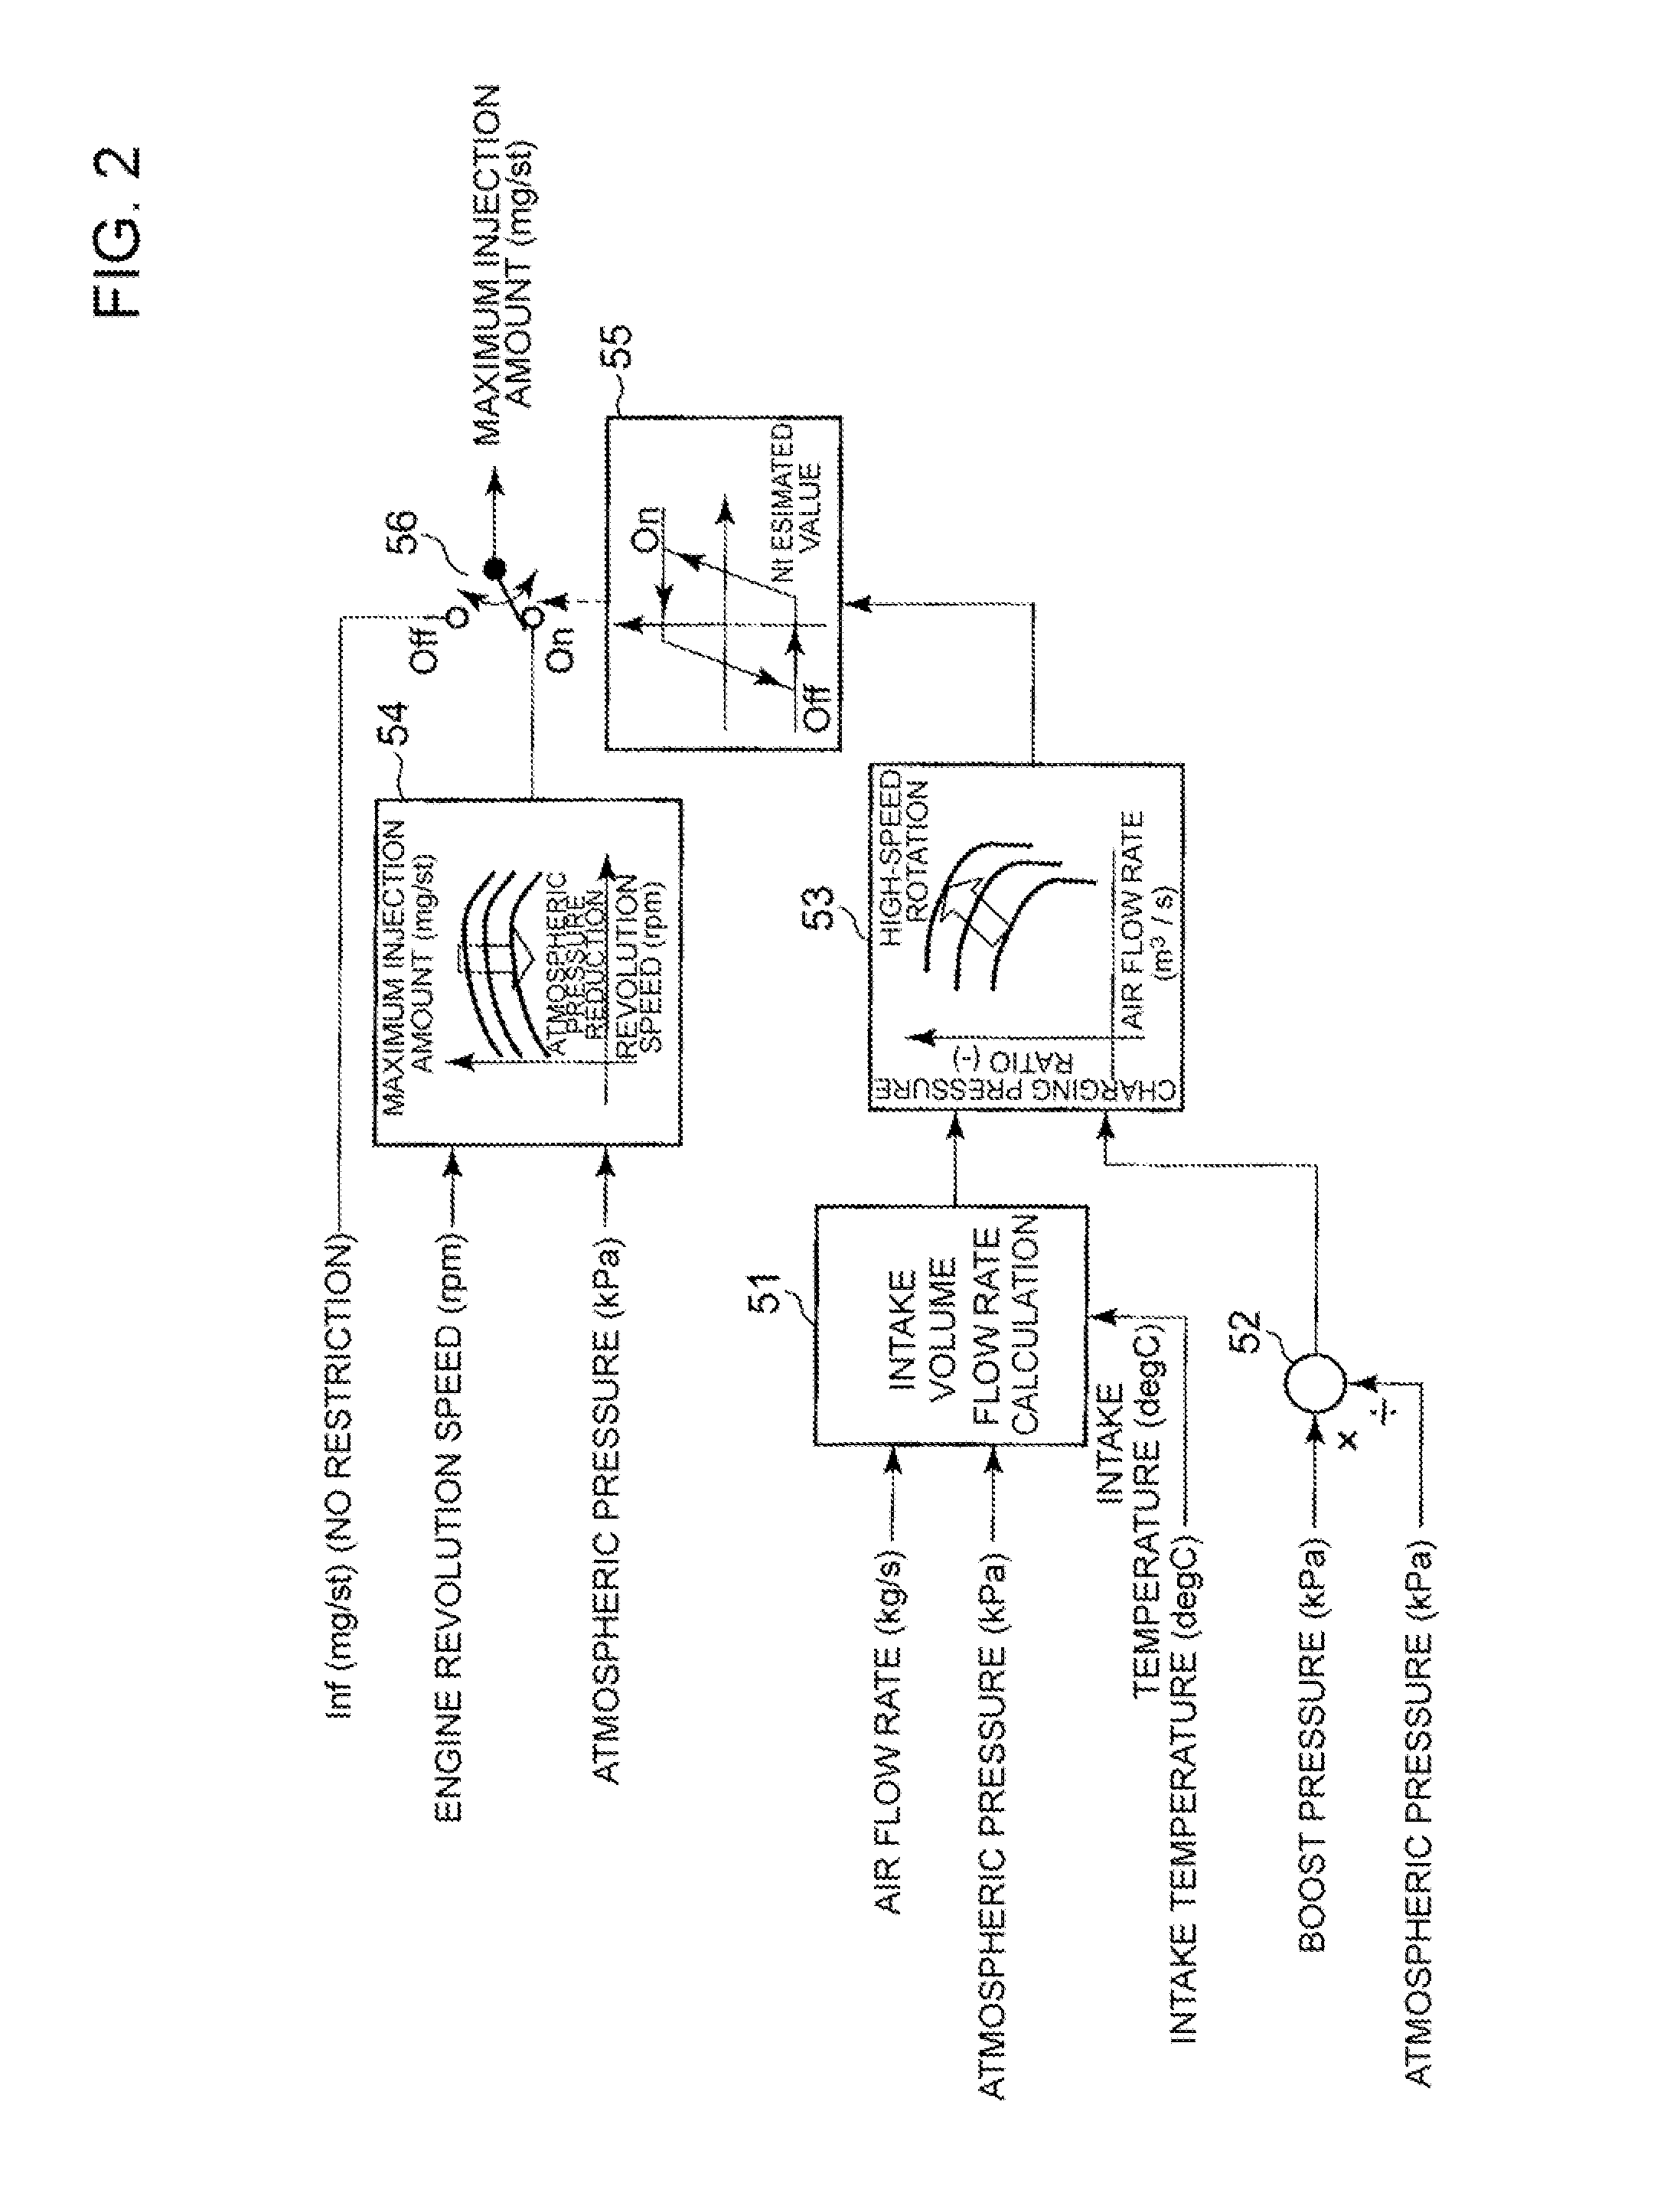 Control device for turbocharged engine